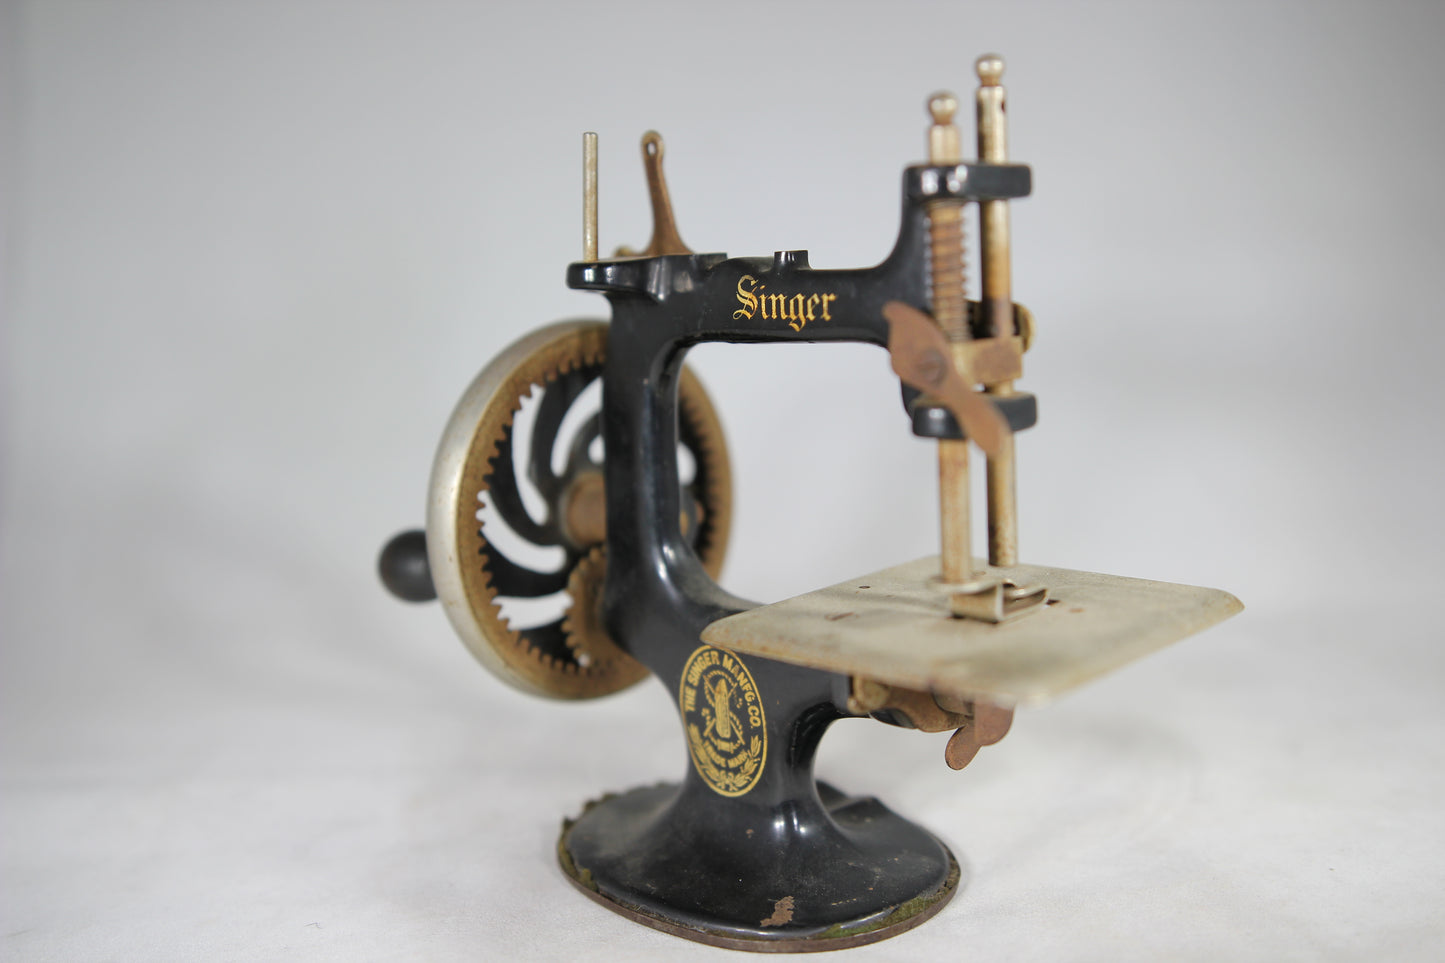 Singer Manufacturing Co. Cast Iron Child's Hand Crank Sewing Machine, Model 20